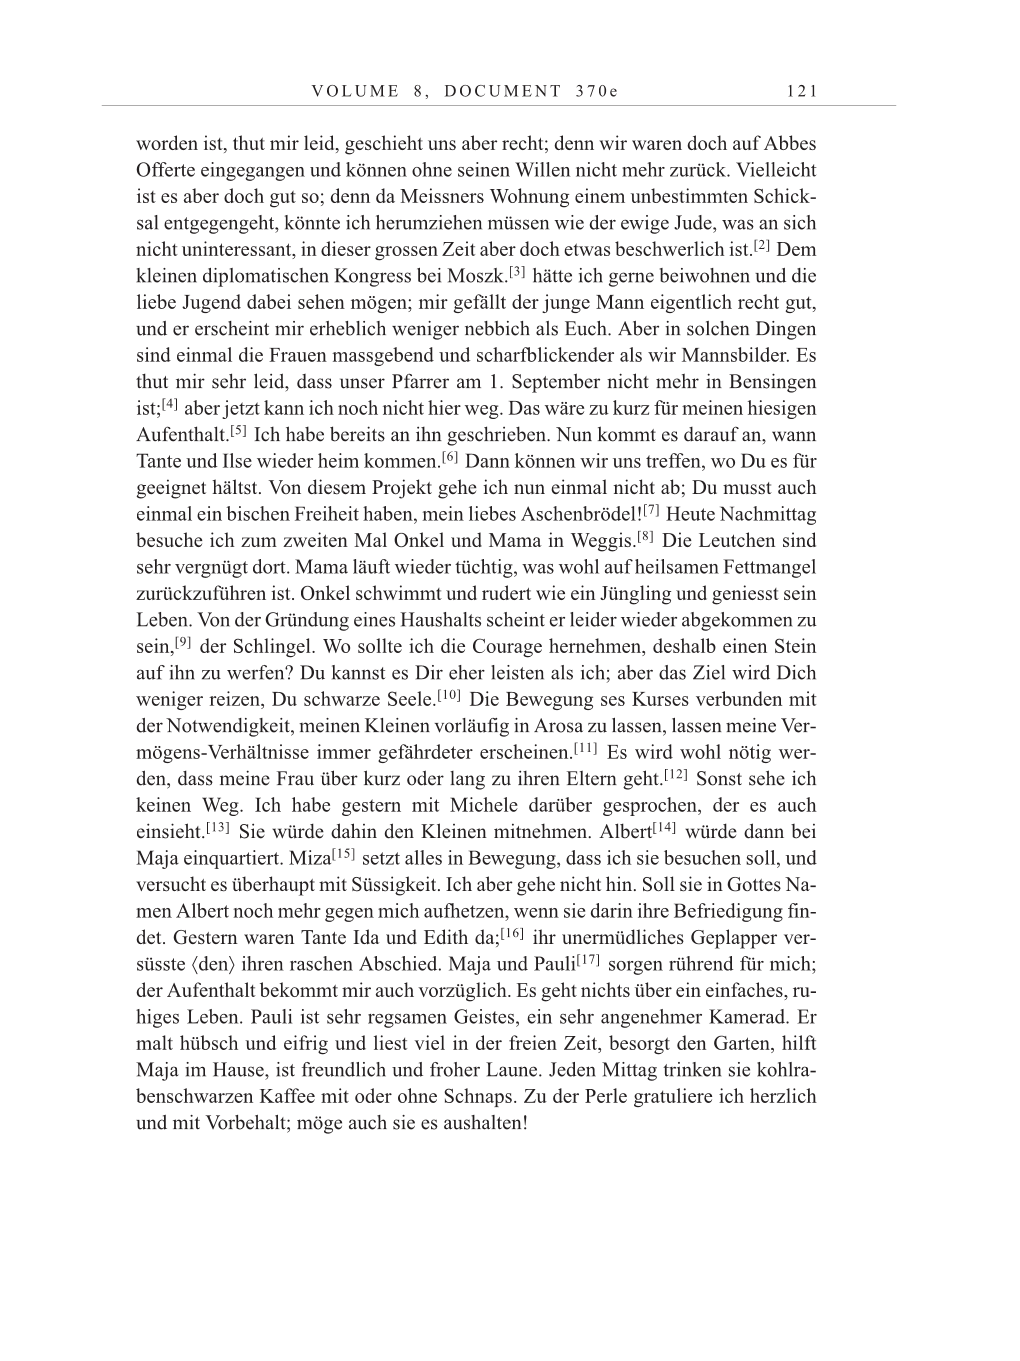 Volume 10: The Berlin Years: Correspondence May-December 1920 / Supplementary Correspondence 1909-1920 page 121